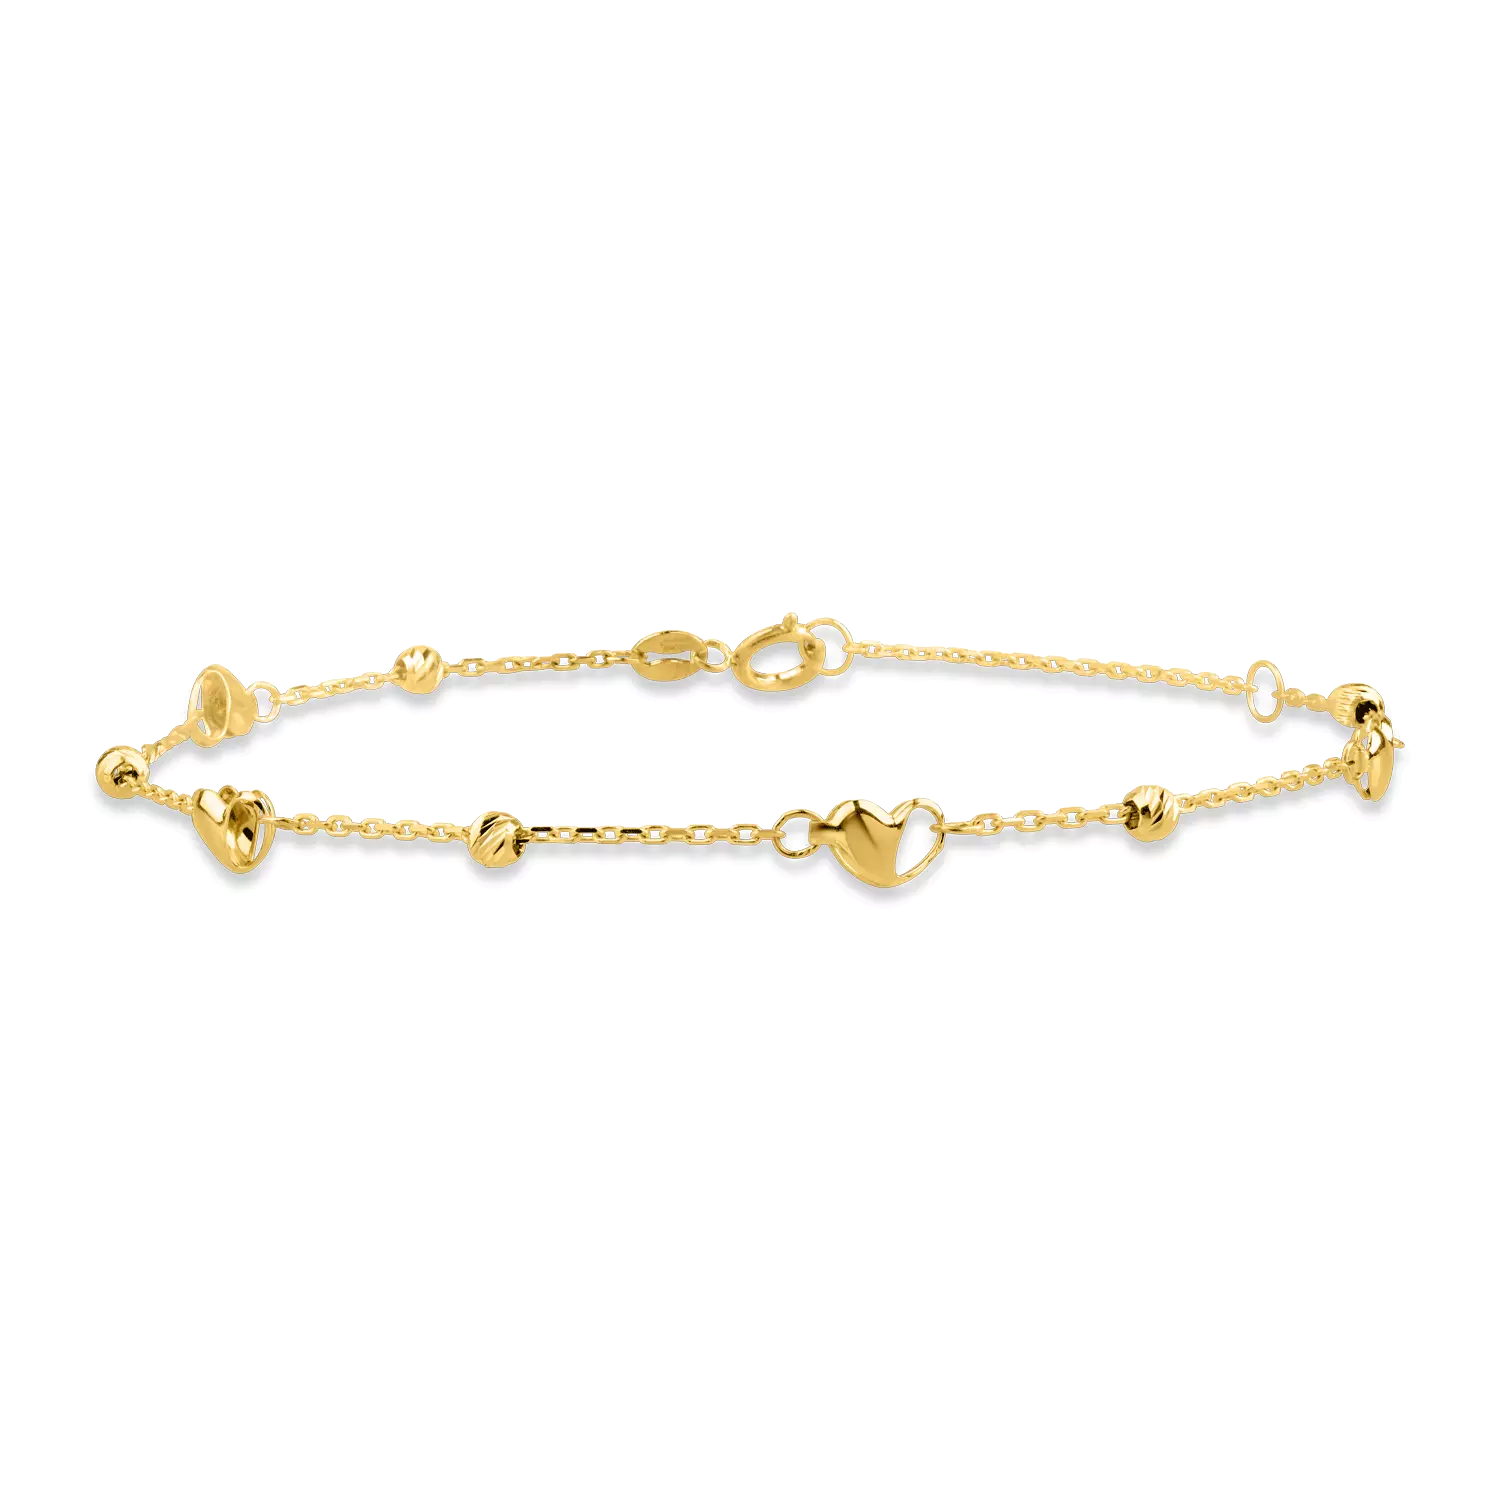 Yellow gold bracelet with beads and hearts